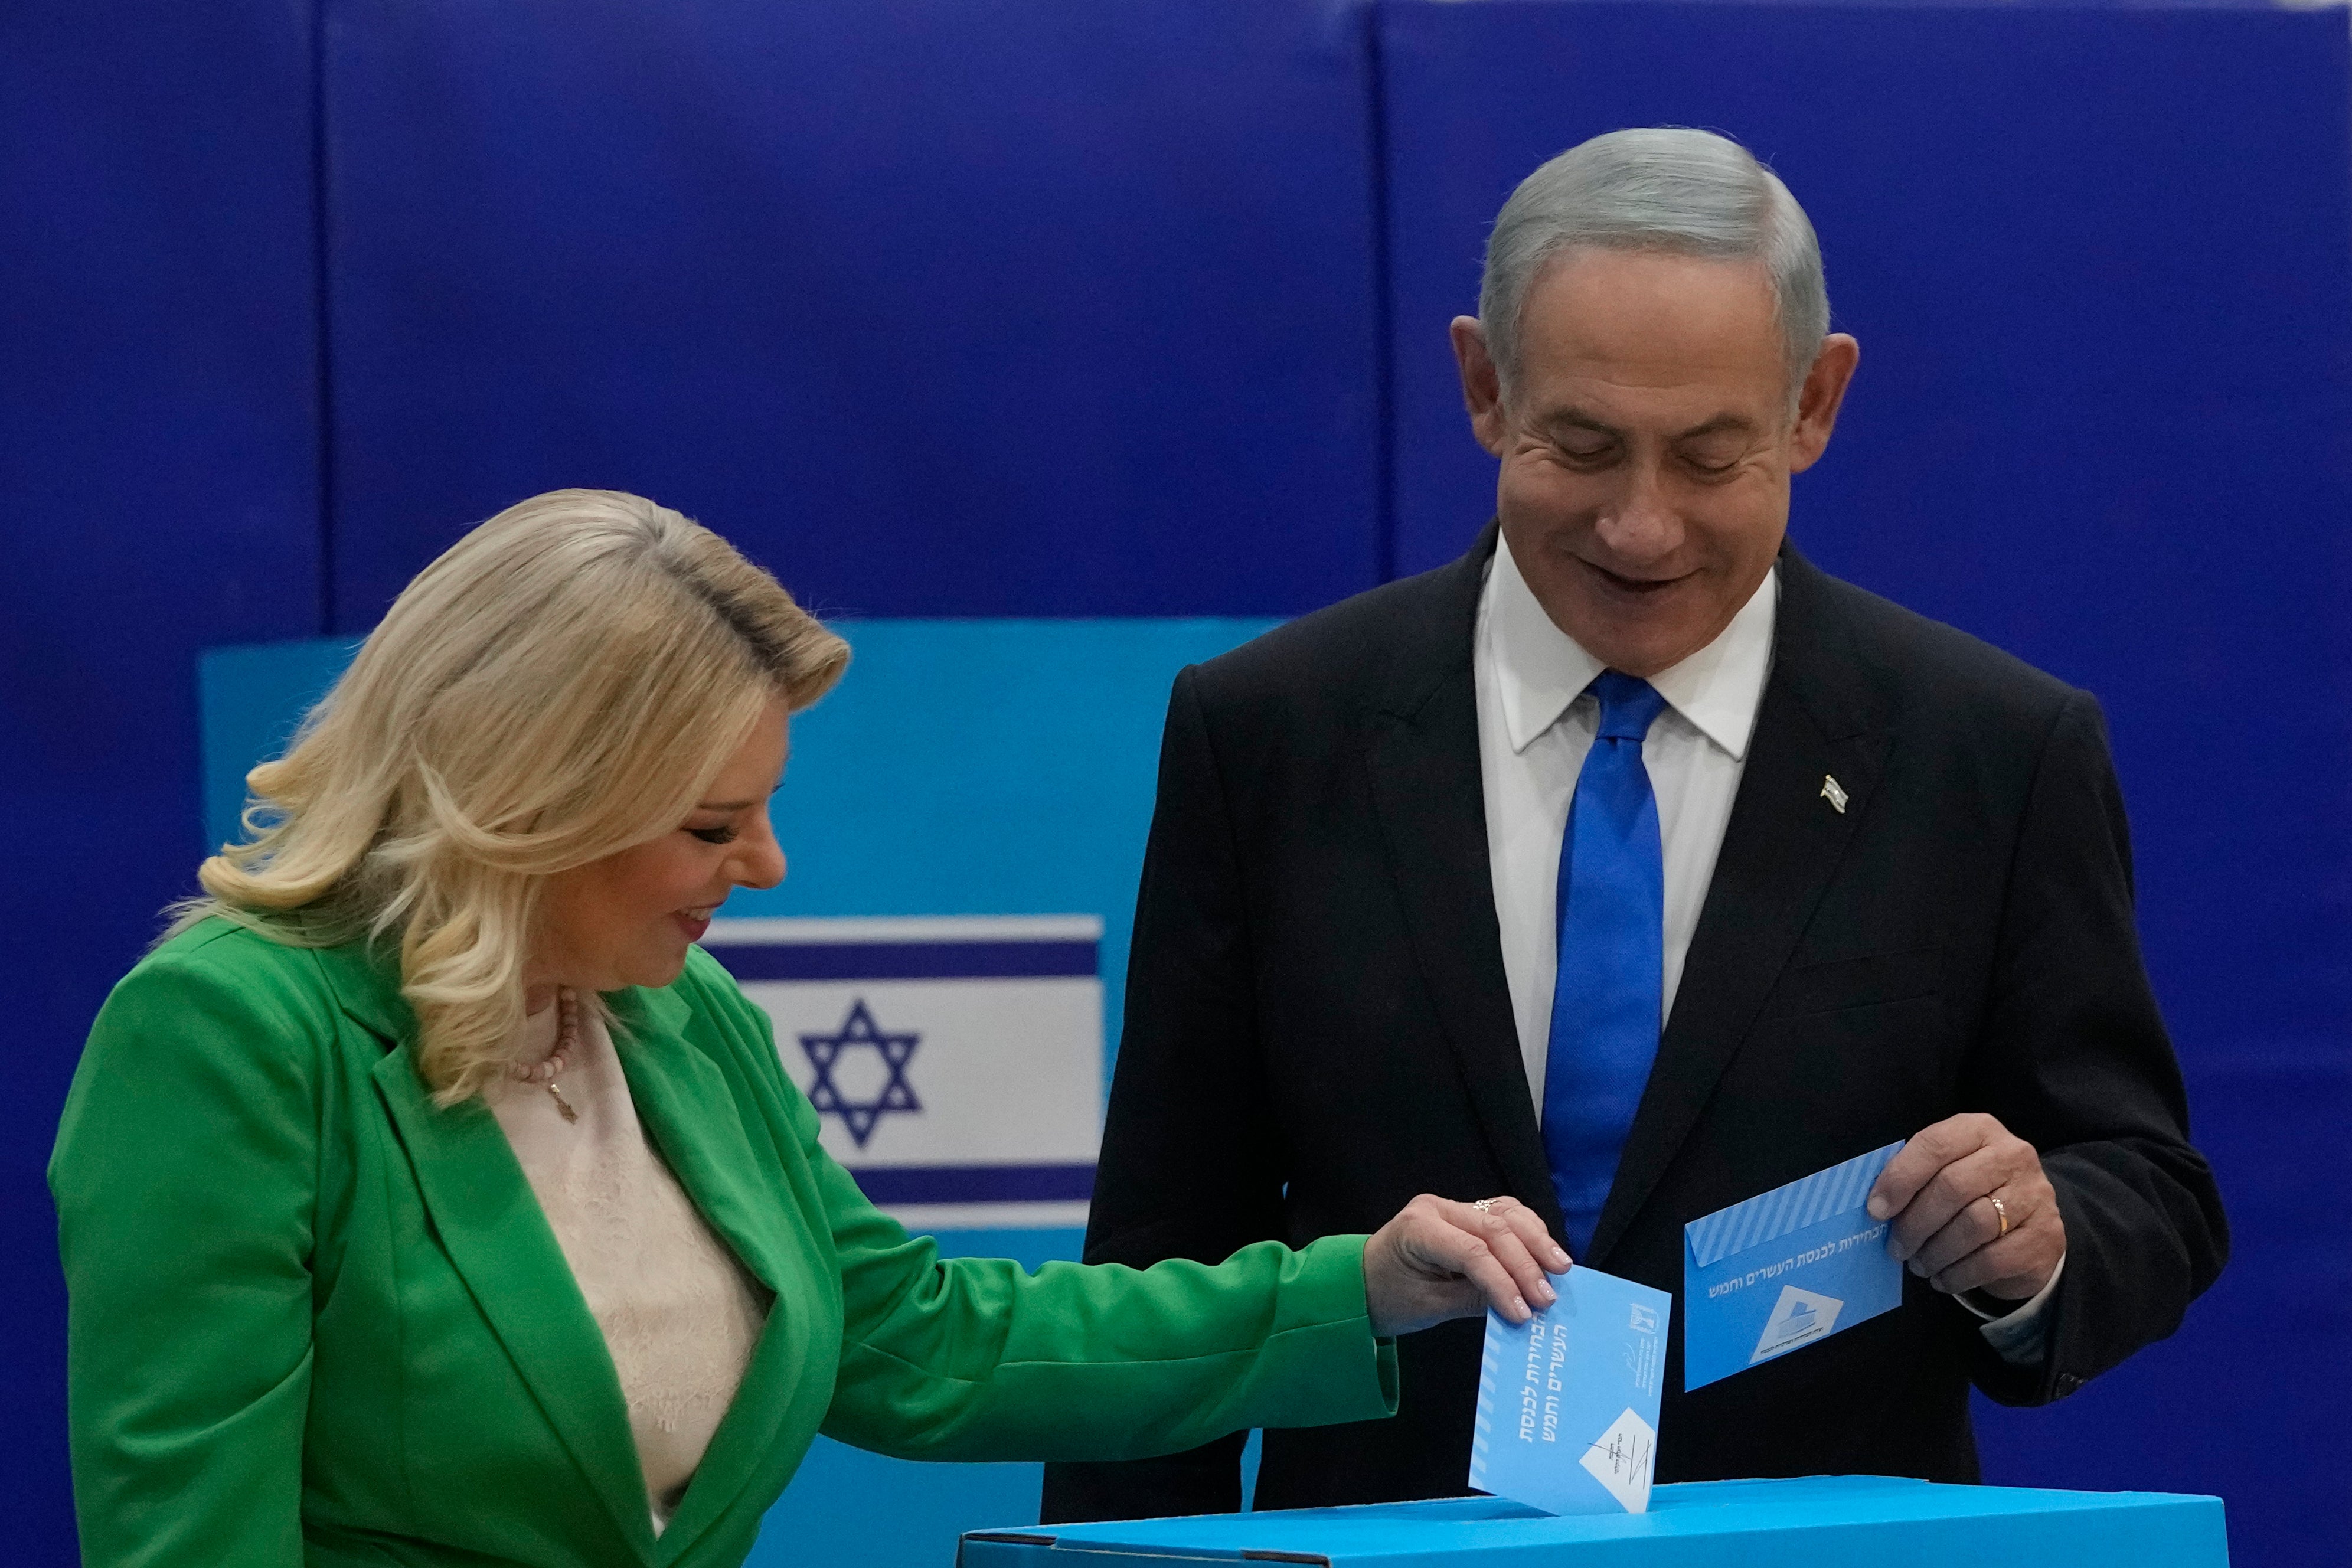 Netanyahu and his wife Sara cast their ballots in Jerusalem